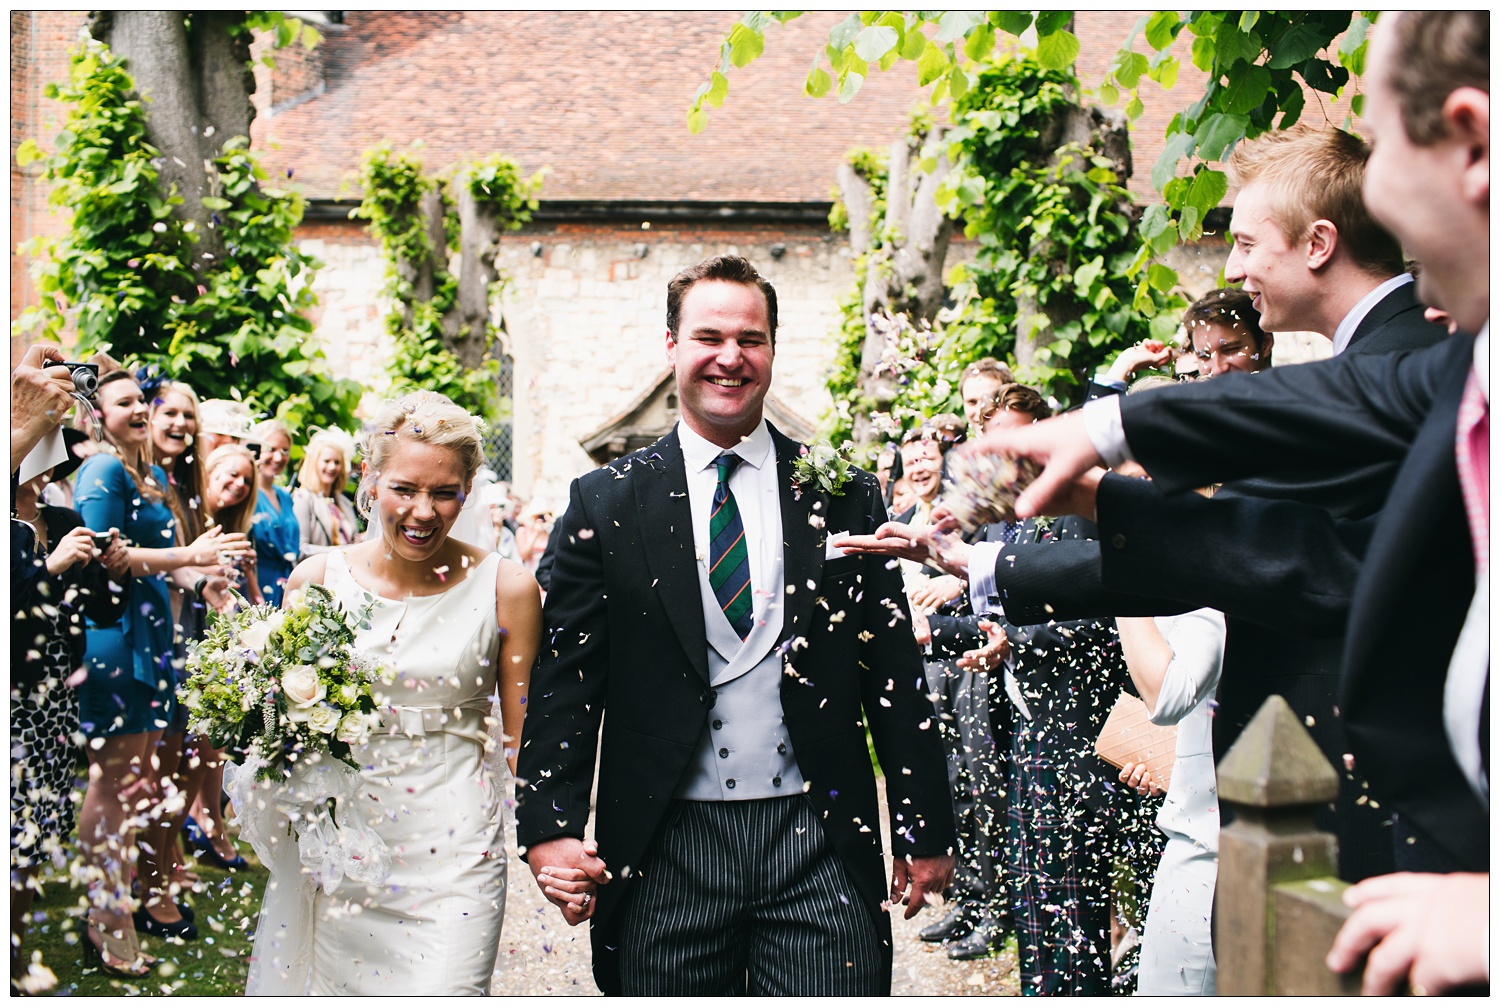 People throw confetti and a newly married couple leaving St Thomas’ church in Bradwell-on-Sea